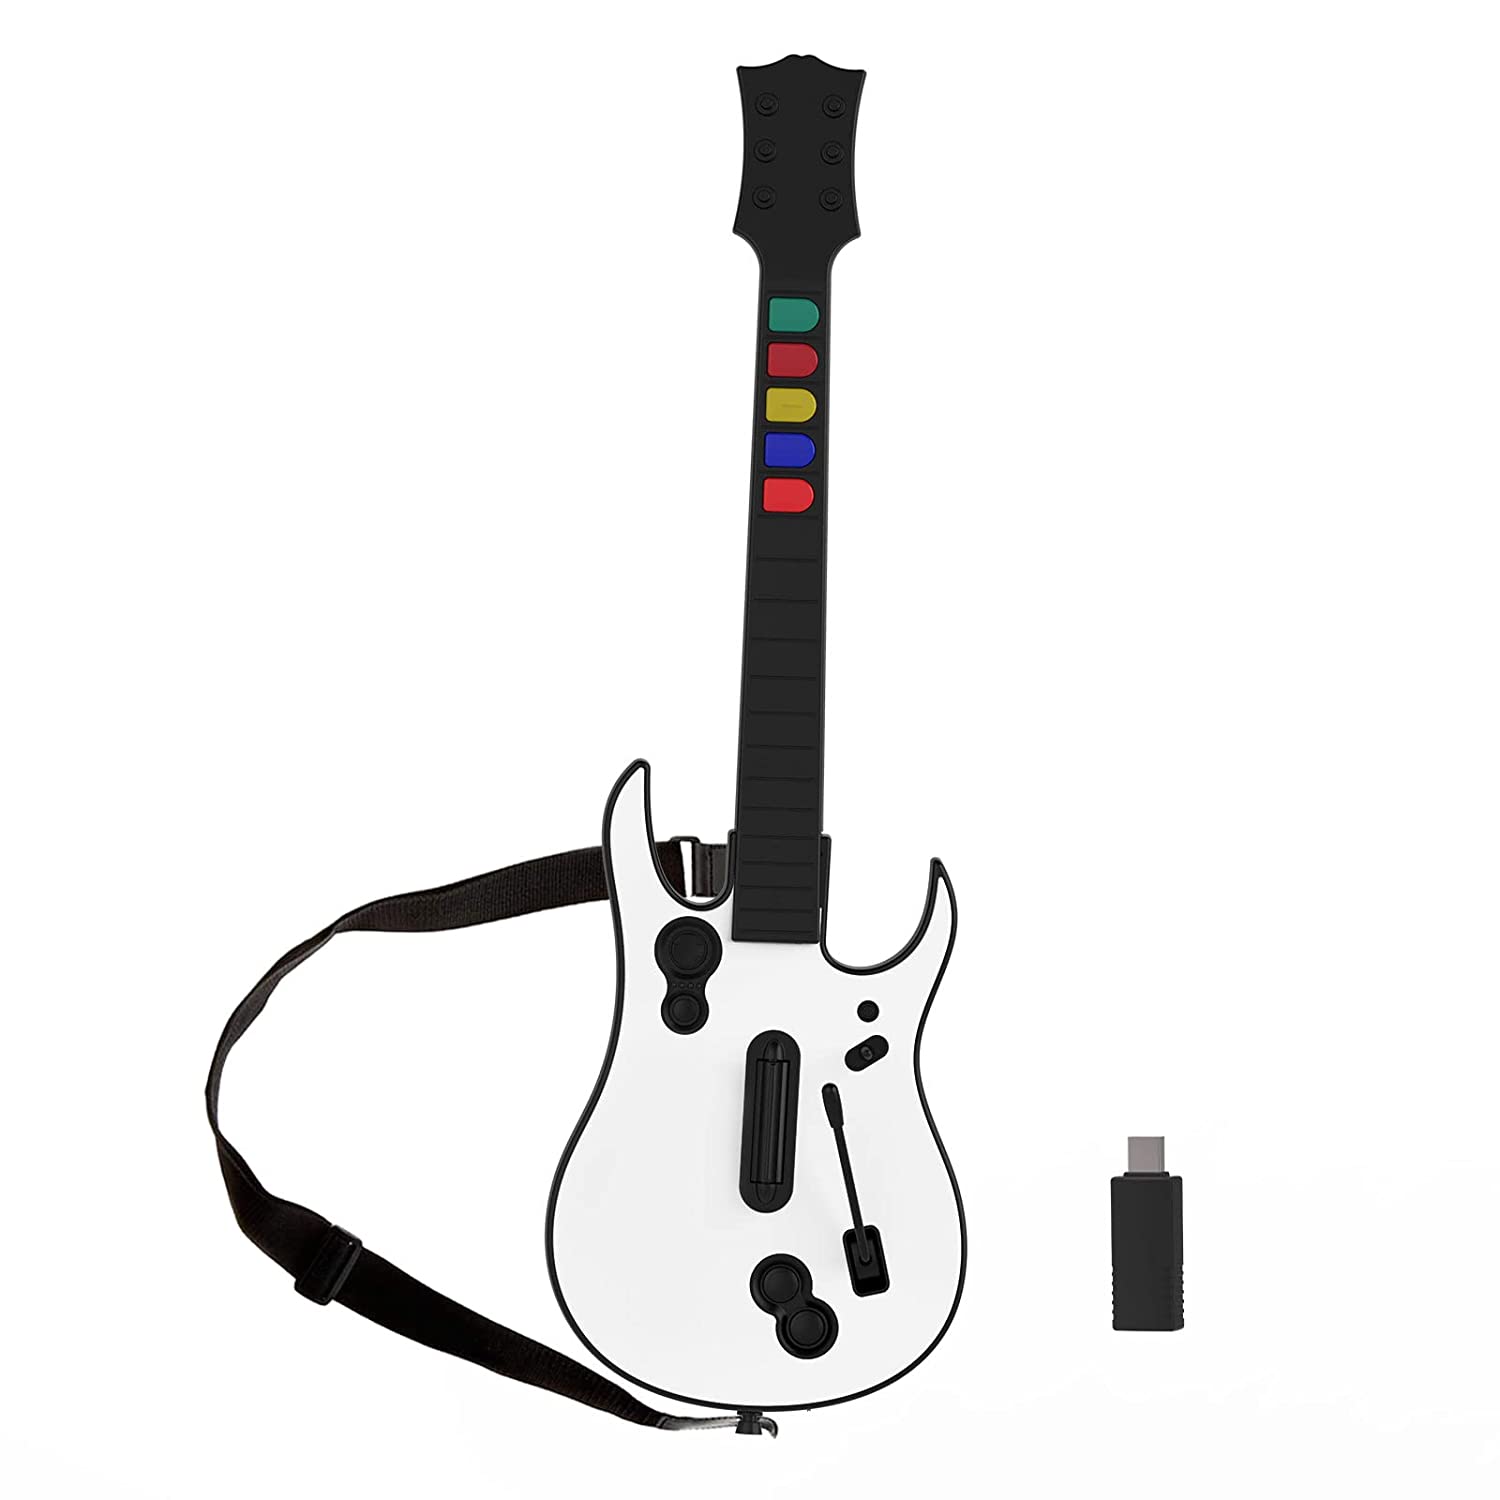 Guitar Hero Guitar, Wireless PC Guitar Hero Controller for PlayStation 3 PS3 with Dongle for Clone Hero, Rock Band